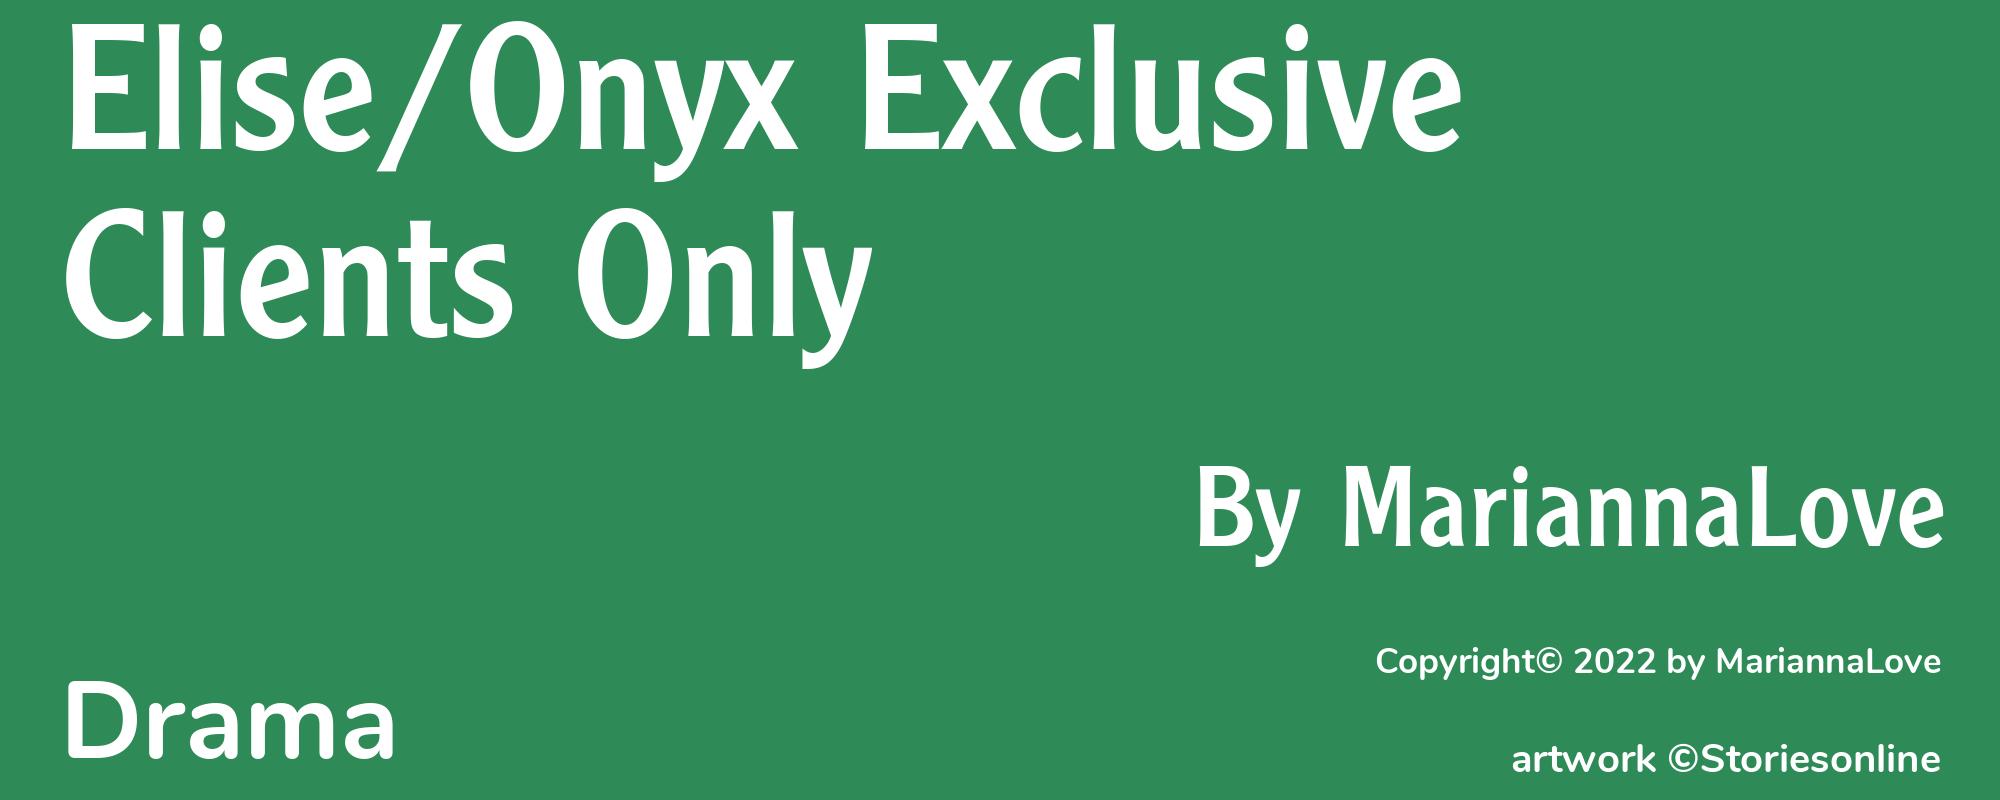 Elise/Onyx Exclusive Clients Only - Cover